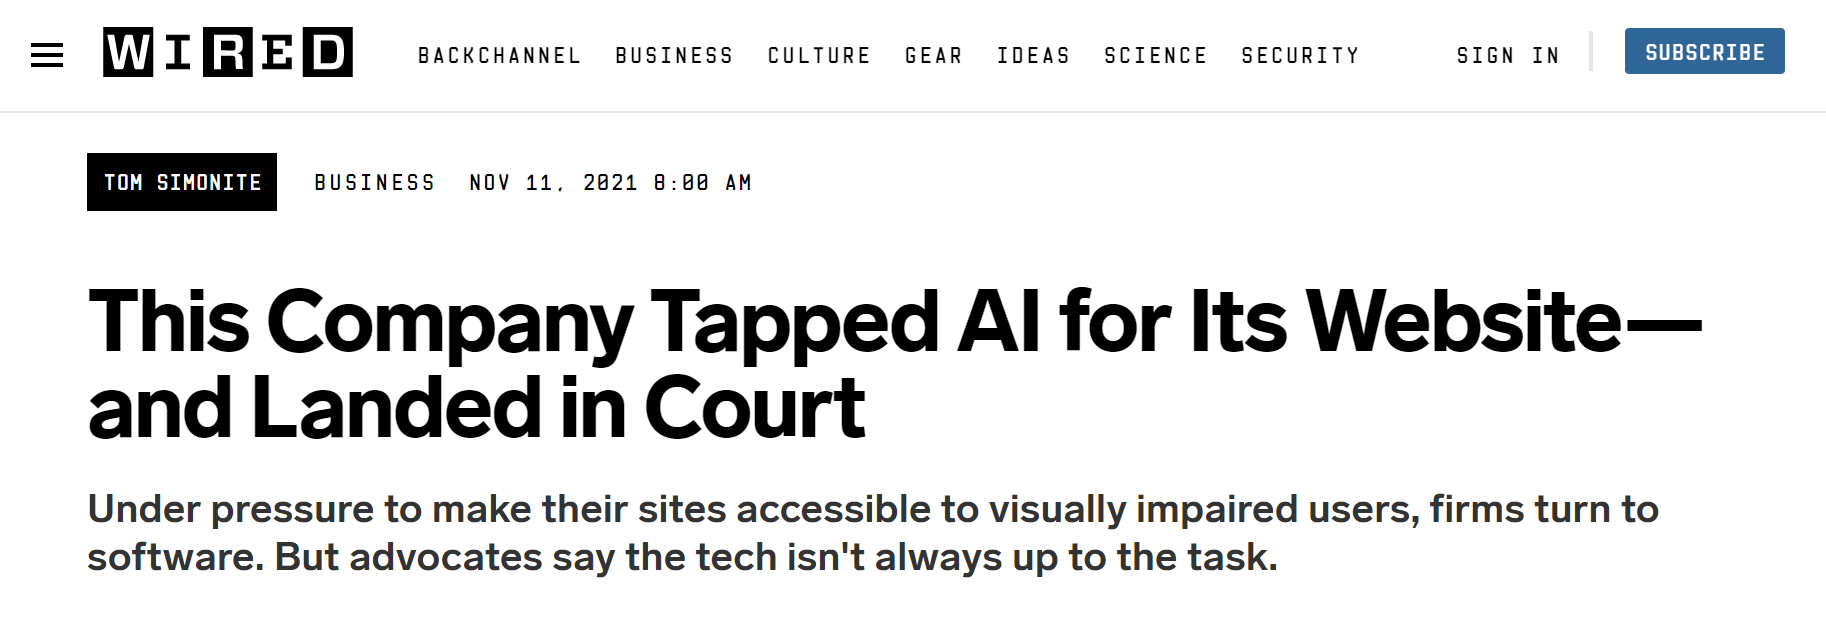 Wired. November 11, 2021. This Company Tapped AI for Its Website—and Landed in Court. Under pressure to make their sites accessible to visually impaired users, firms turn to software. But advocates say the tech isn't always up to the task.